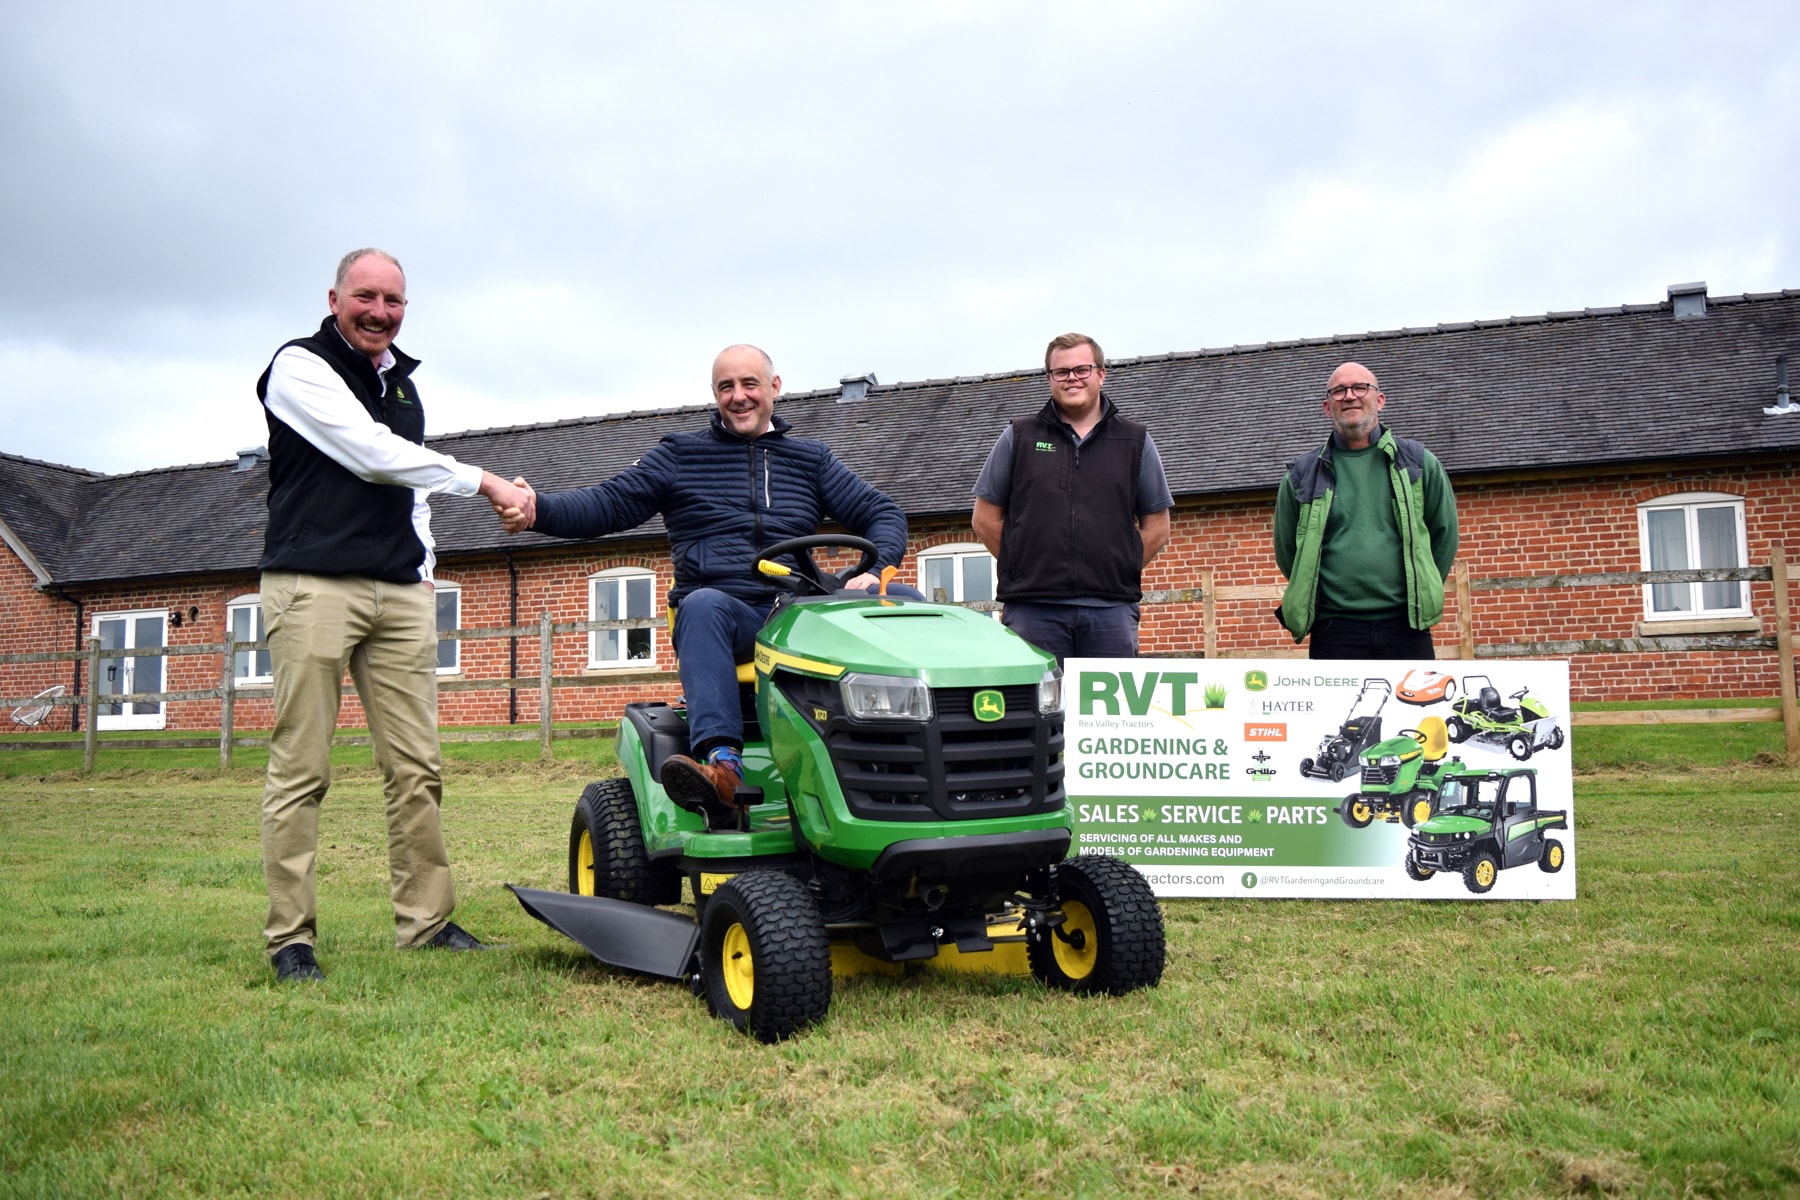 From left to right: Marcus Morris (John Deere Territory Manager), Jack Fairhead, Dan Brown (RVT Gardening & Groundcare Territory Sales), Paul Roberts (RVT Workshop Manager)